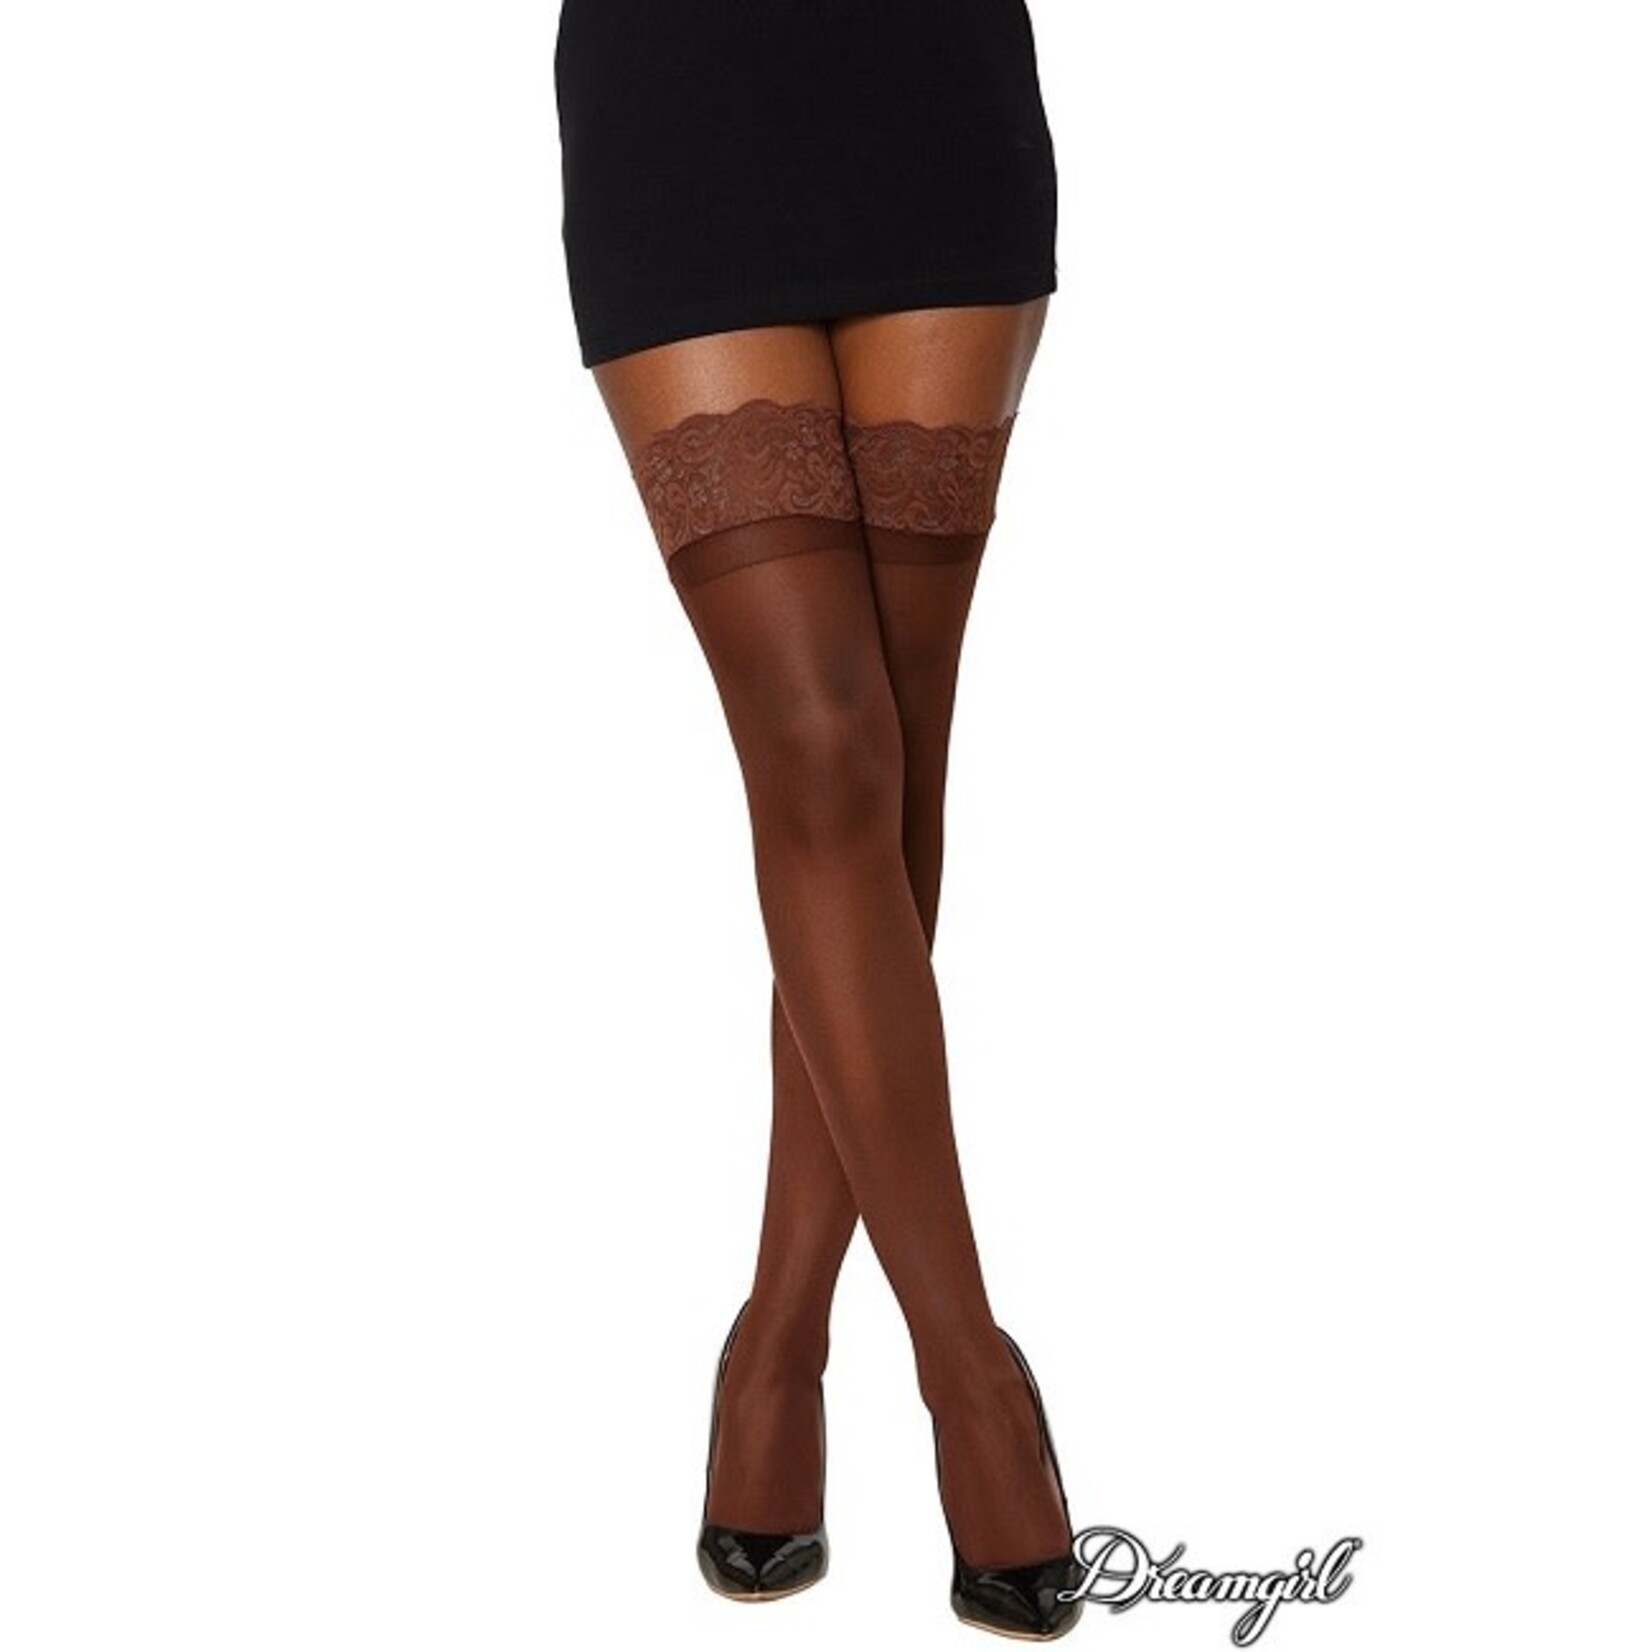 Dreamgirl Dreamgirl Tuscany Sheer Lace Top Stocking with Stay Ups OS